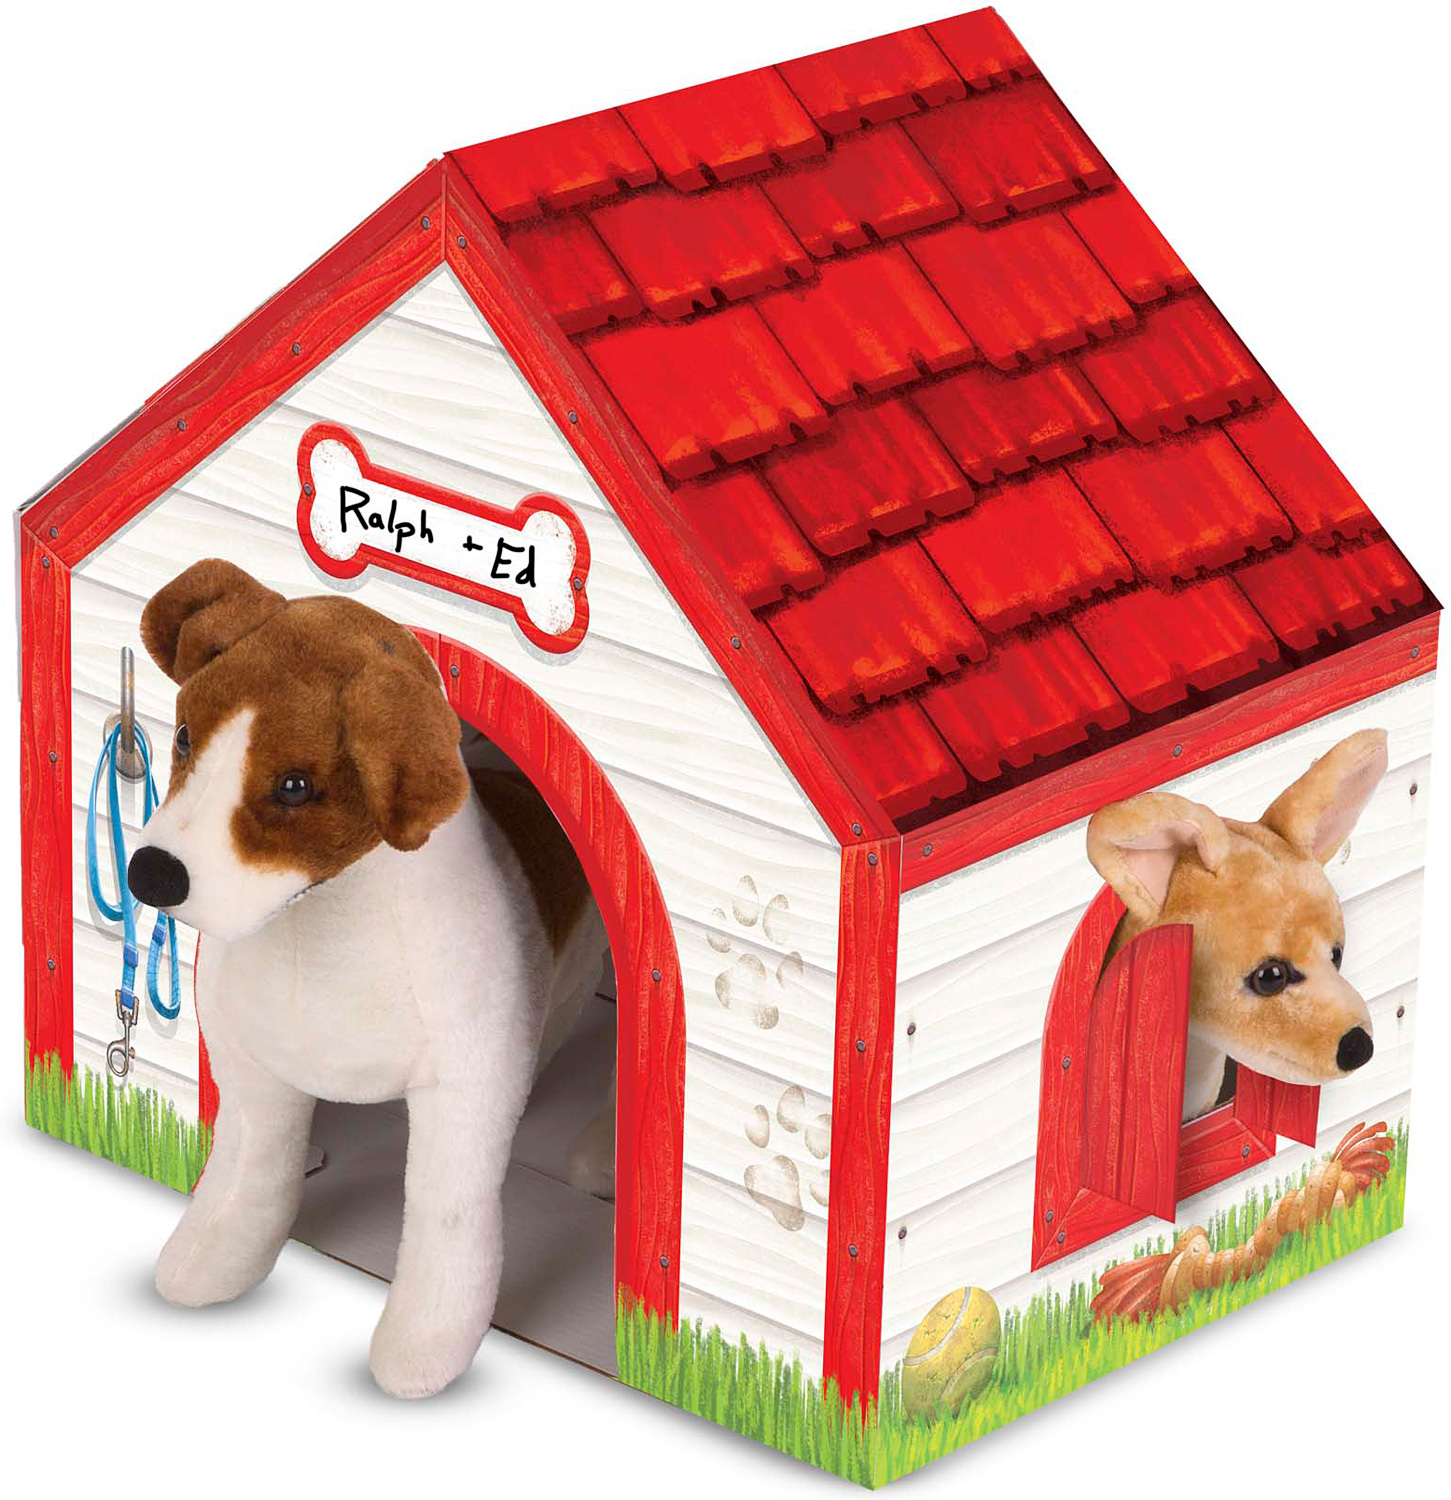 Doghouse Plush Pet Indoor Playhouse Teaching Toys and Books